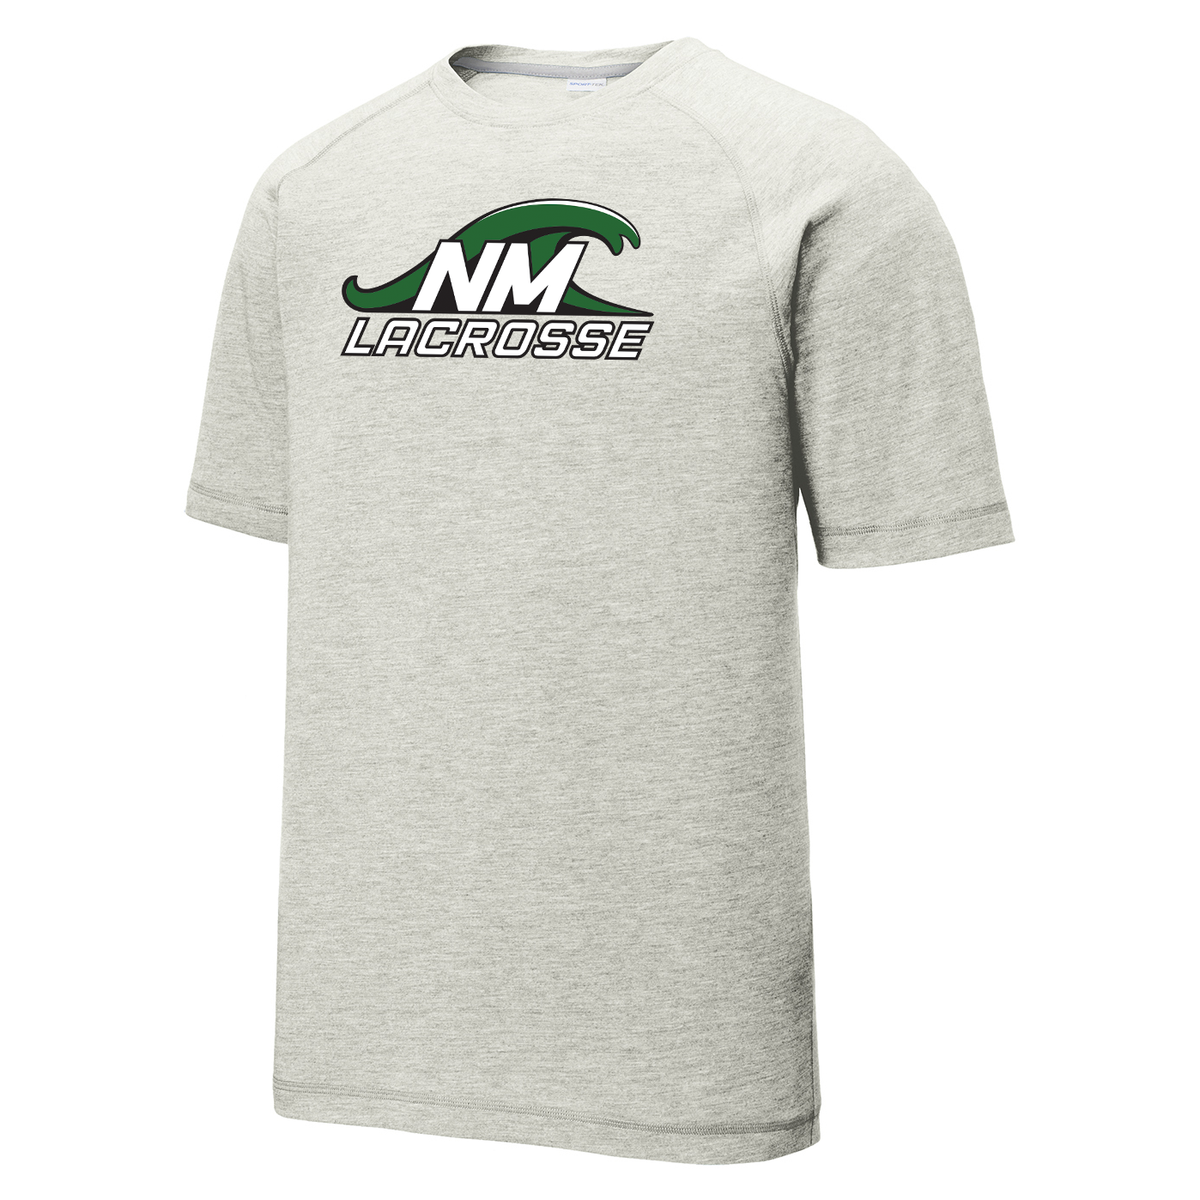 New Milford Youth Lacrosse Raglan CottonTouch Tee